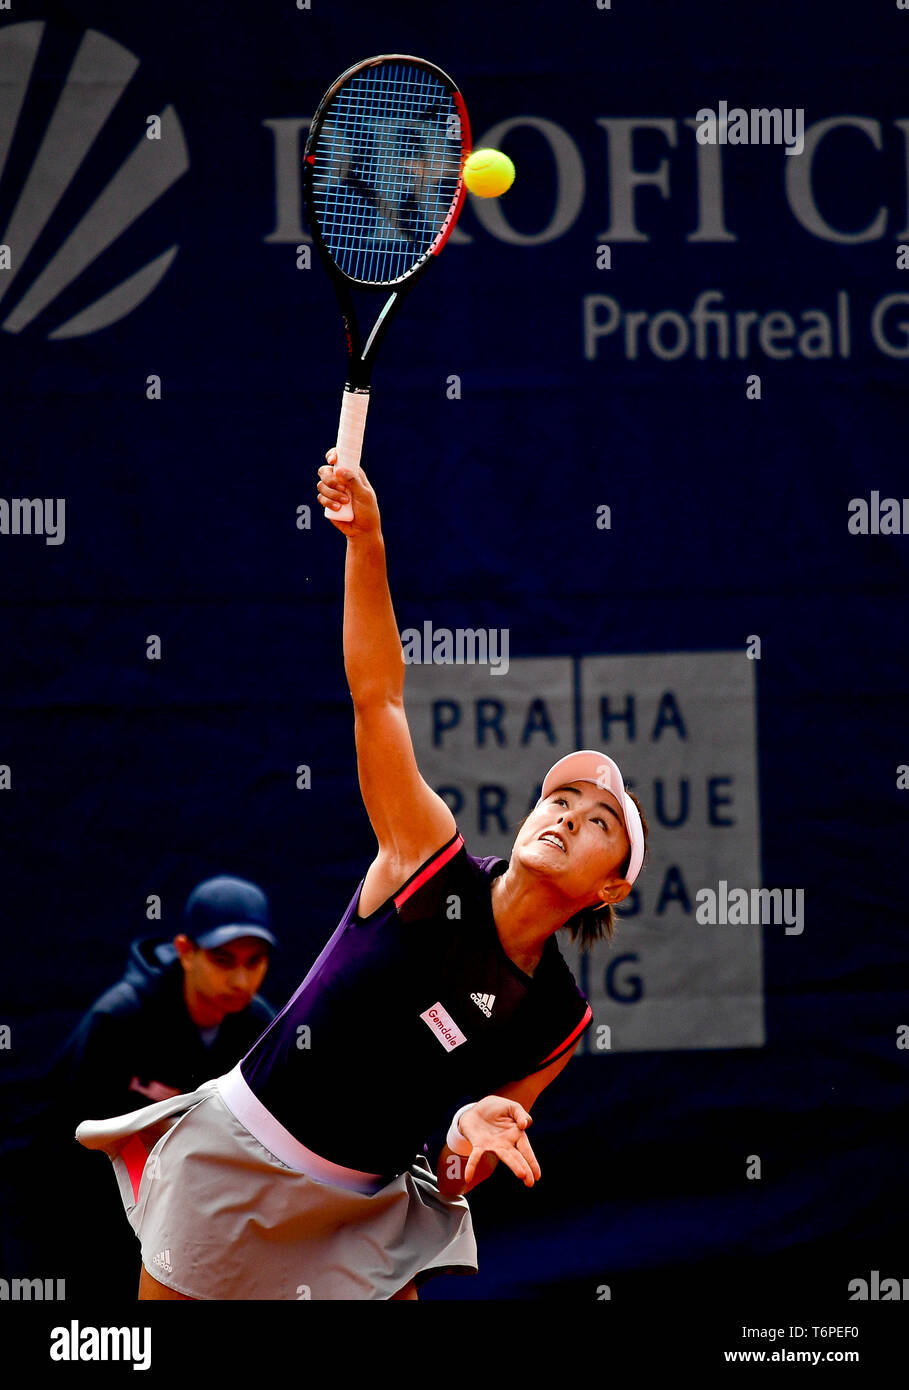 Prague, Czech Republic. 02nd May, 2019. Tennis player Wang Qiang of China in action during the match against Bernada Pera of USA in Prague Open women's tennis tournament, Czech Republic, May 2, 2019. Credit: Roman Vondrous/CTK Photo/Alamy Live News Stock Photo